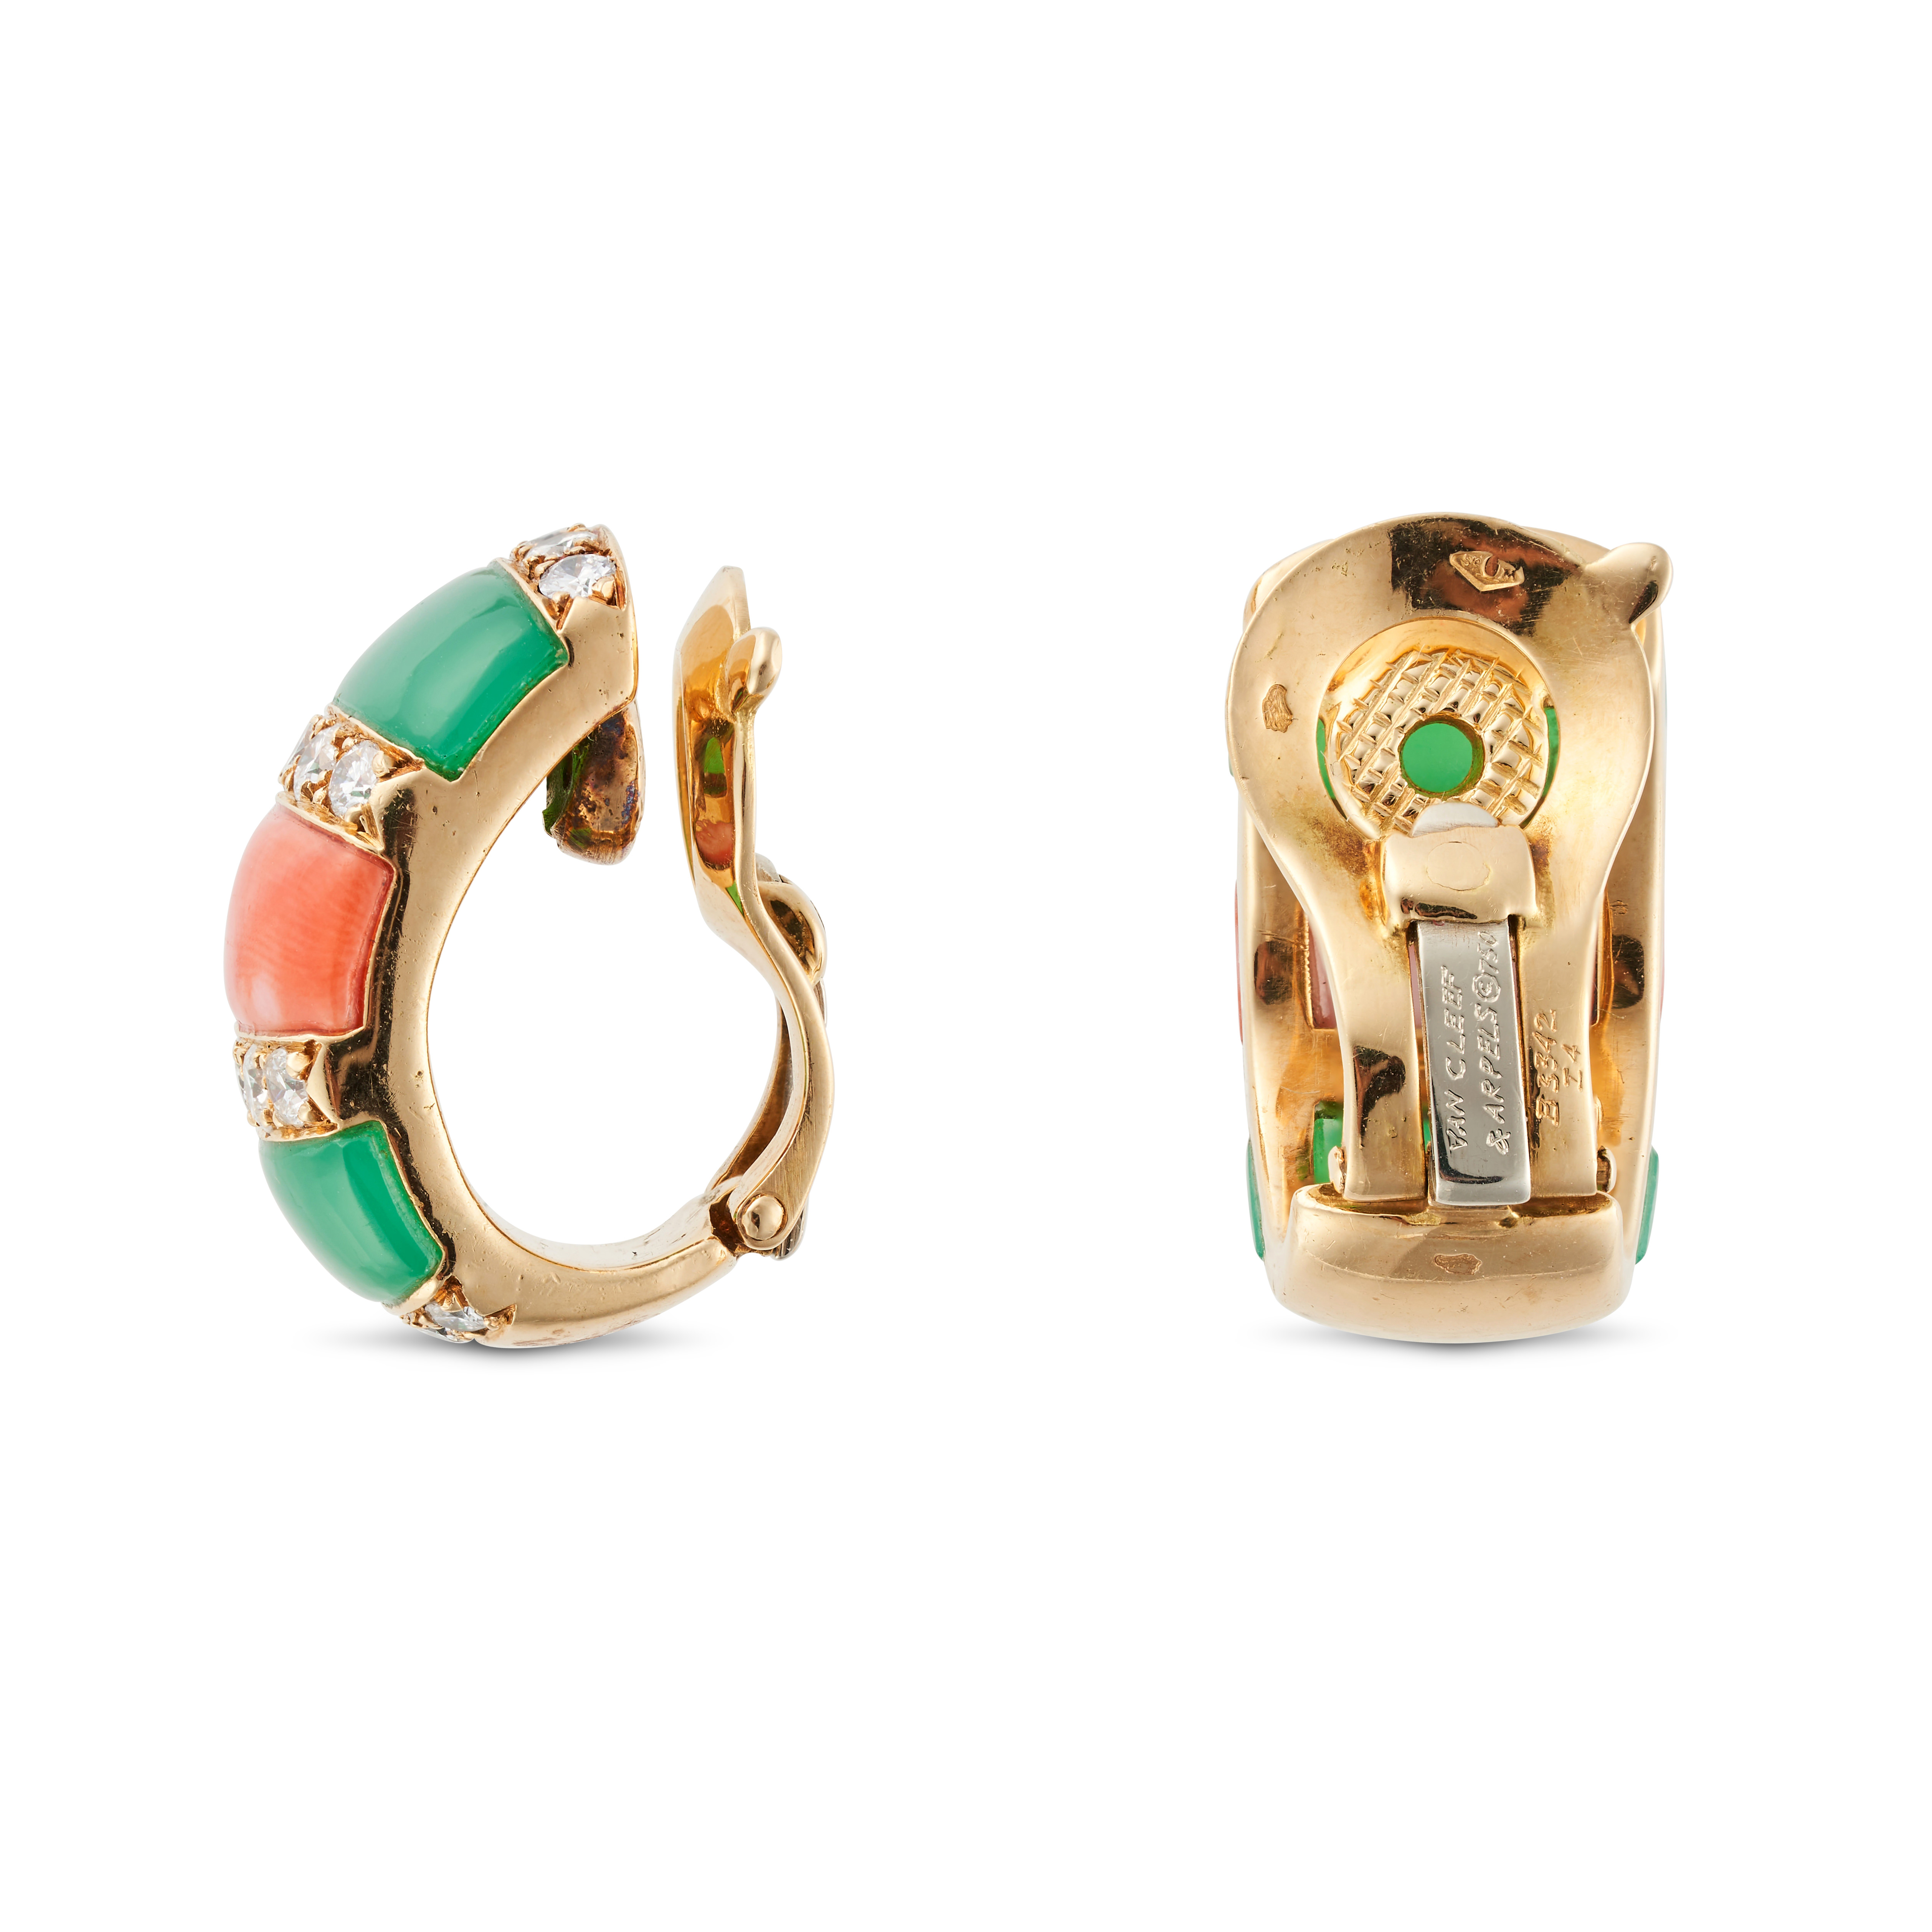 VAN CLEEF & ARPELS, A PAIR OF CORAL, CHRYSOPRASE AND DIAMOND CLIP EARRINGS in 18ct yellow gold, e... - Bild 2 aus 2